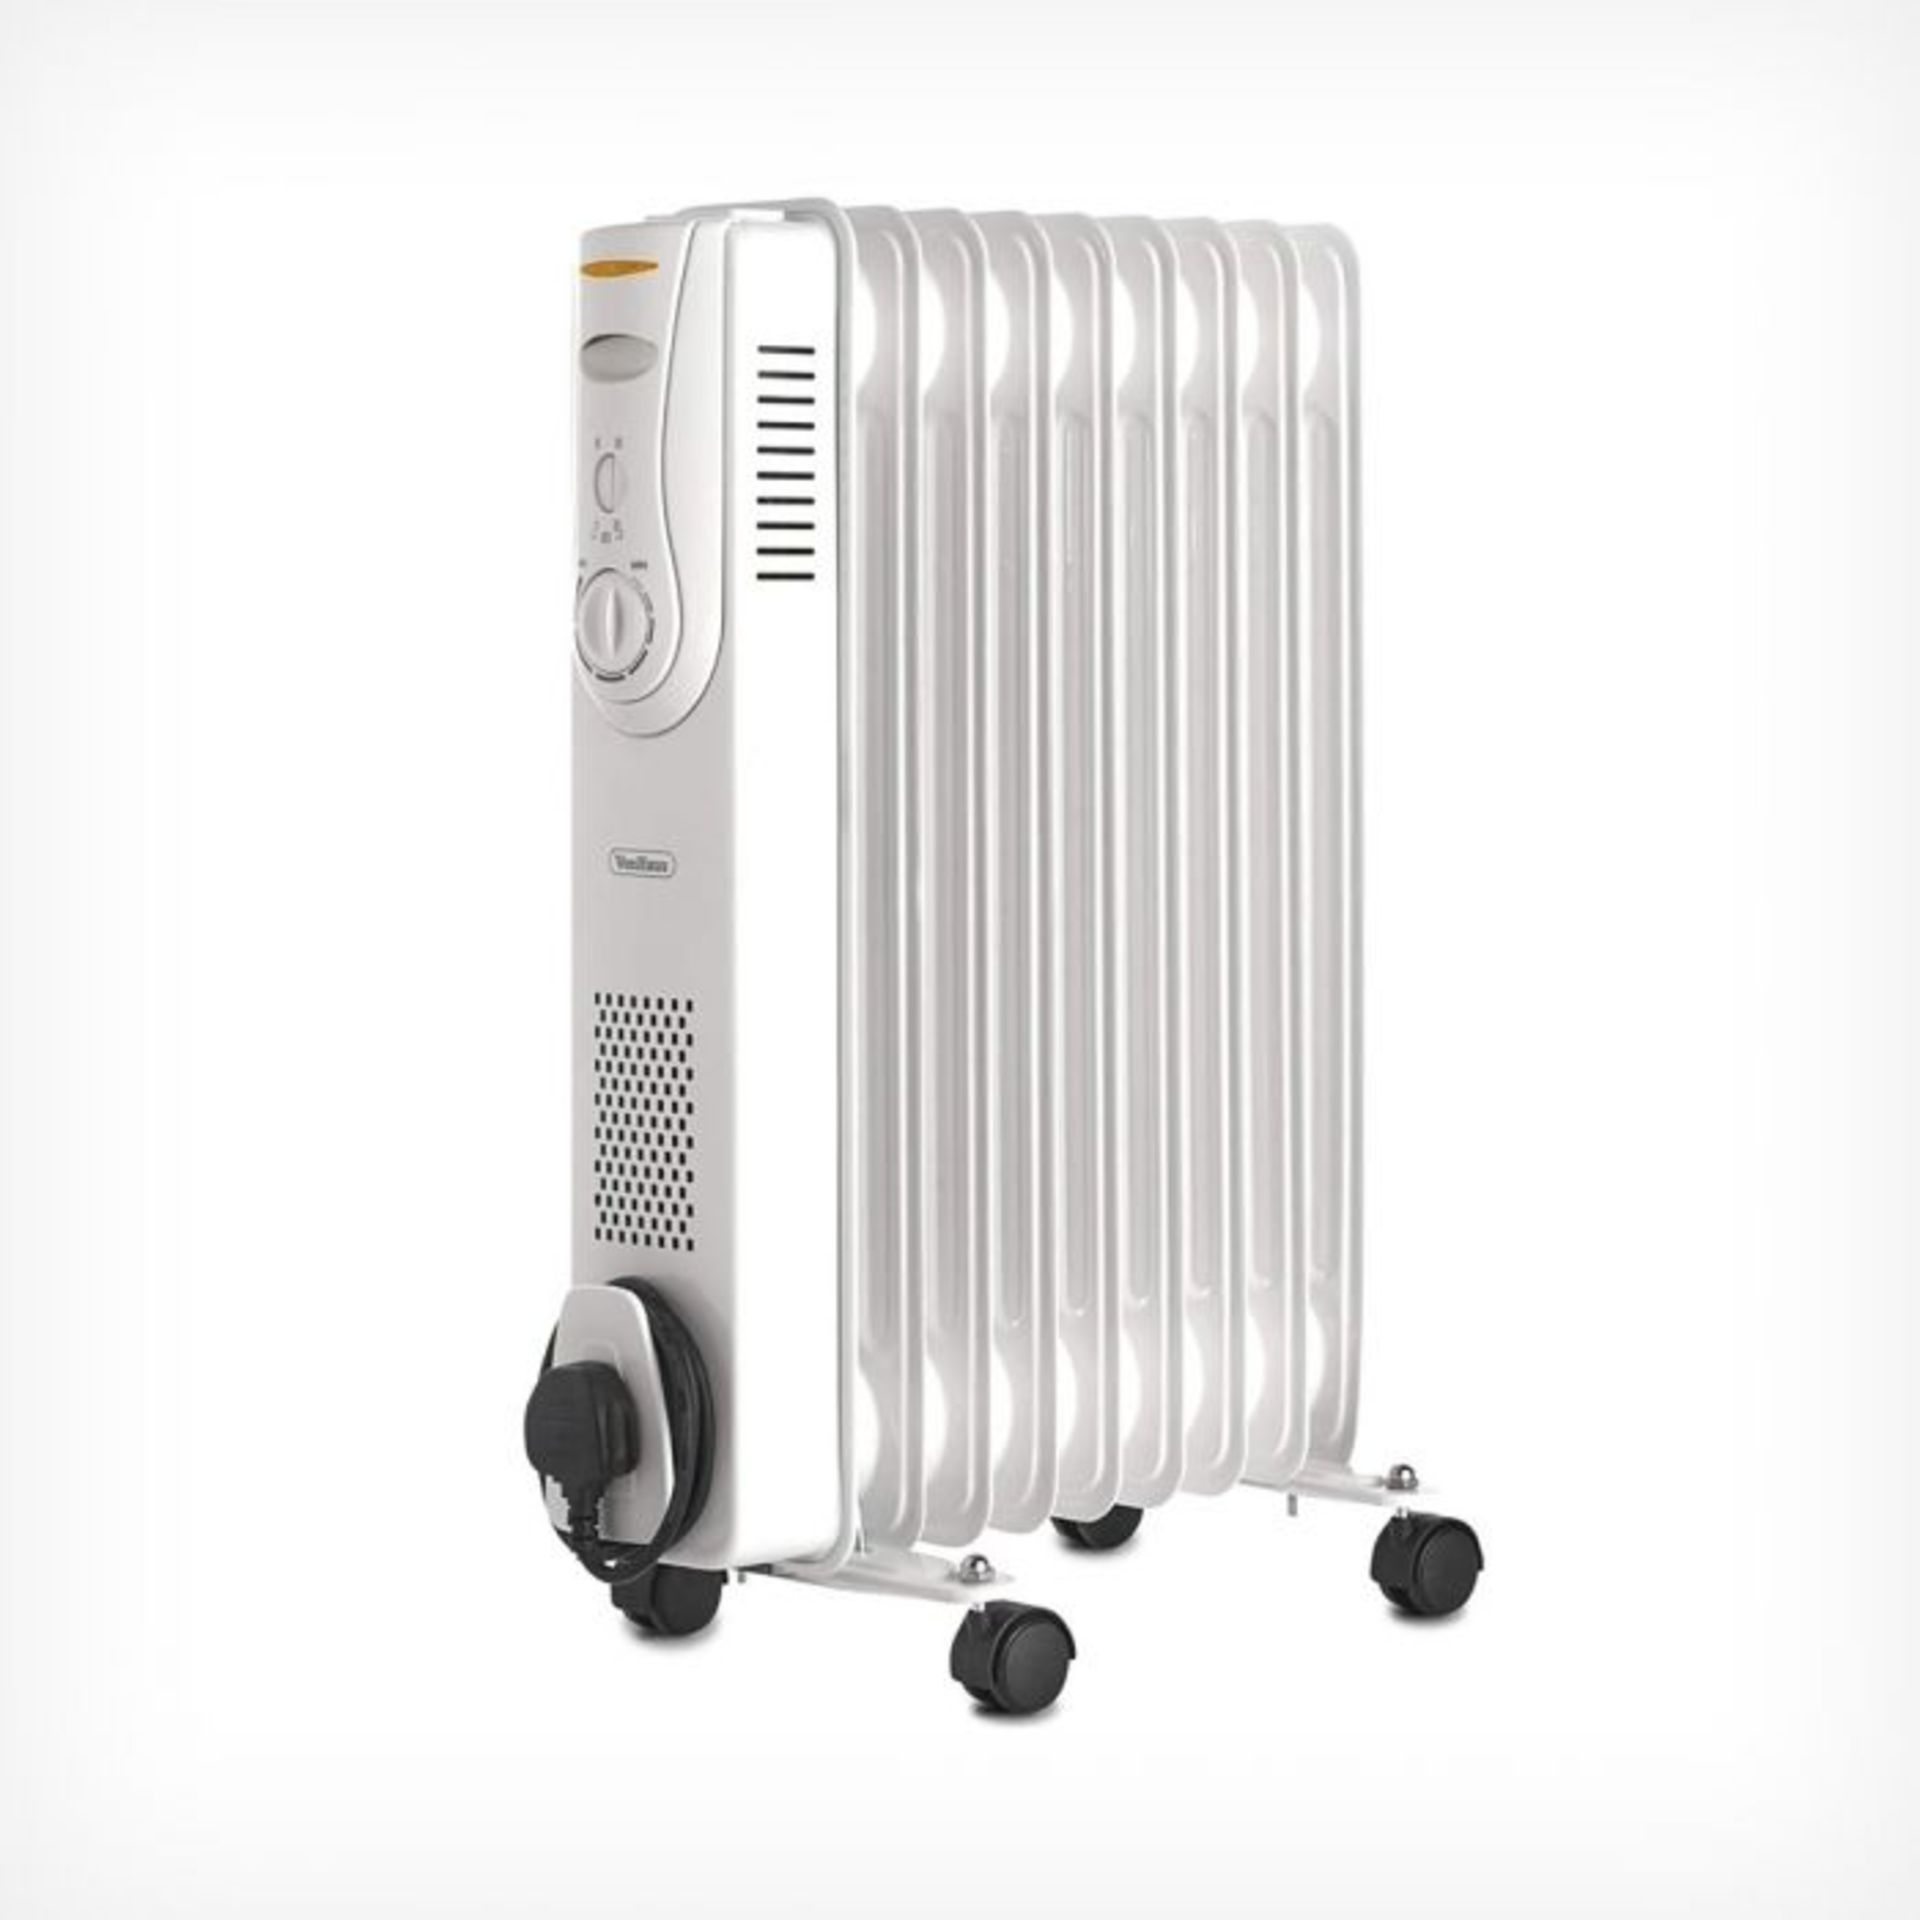 (S424) 9 Fin 2000W Oil Filled Radiator - White Powerful 2000W radiator with 9 oil-filled fins ... - Image 2 of 4